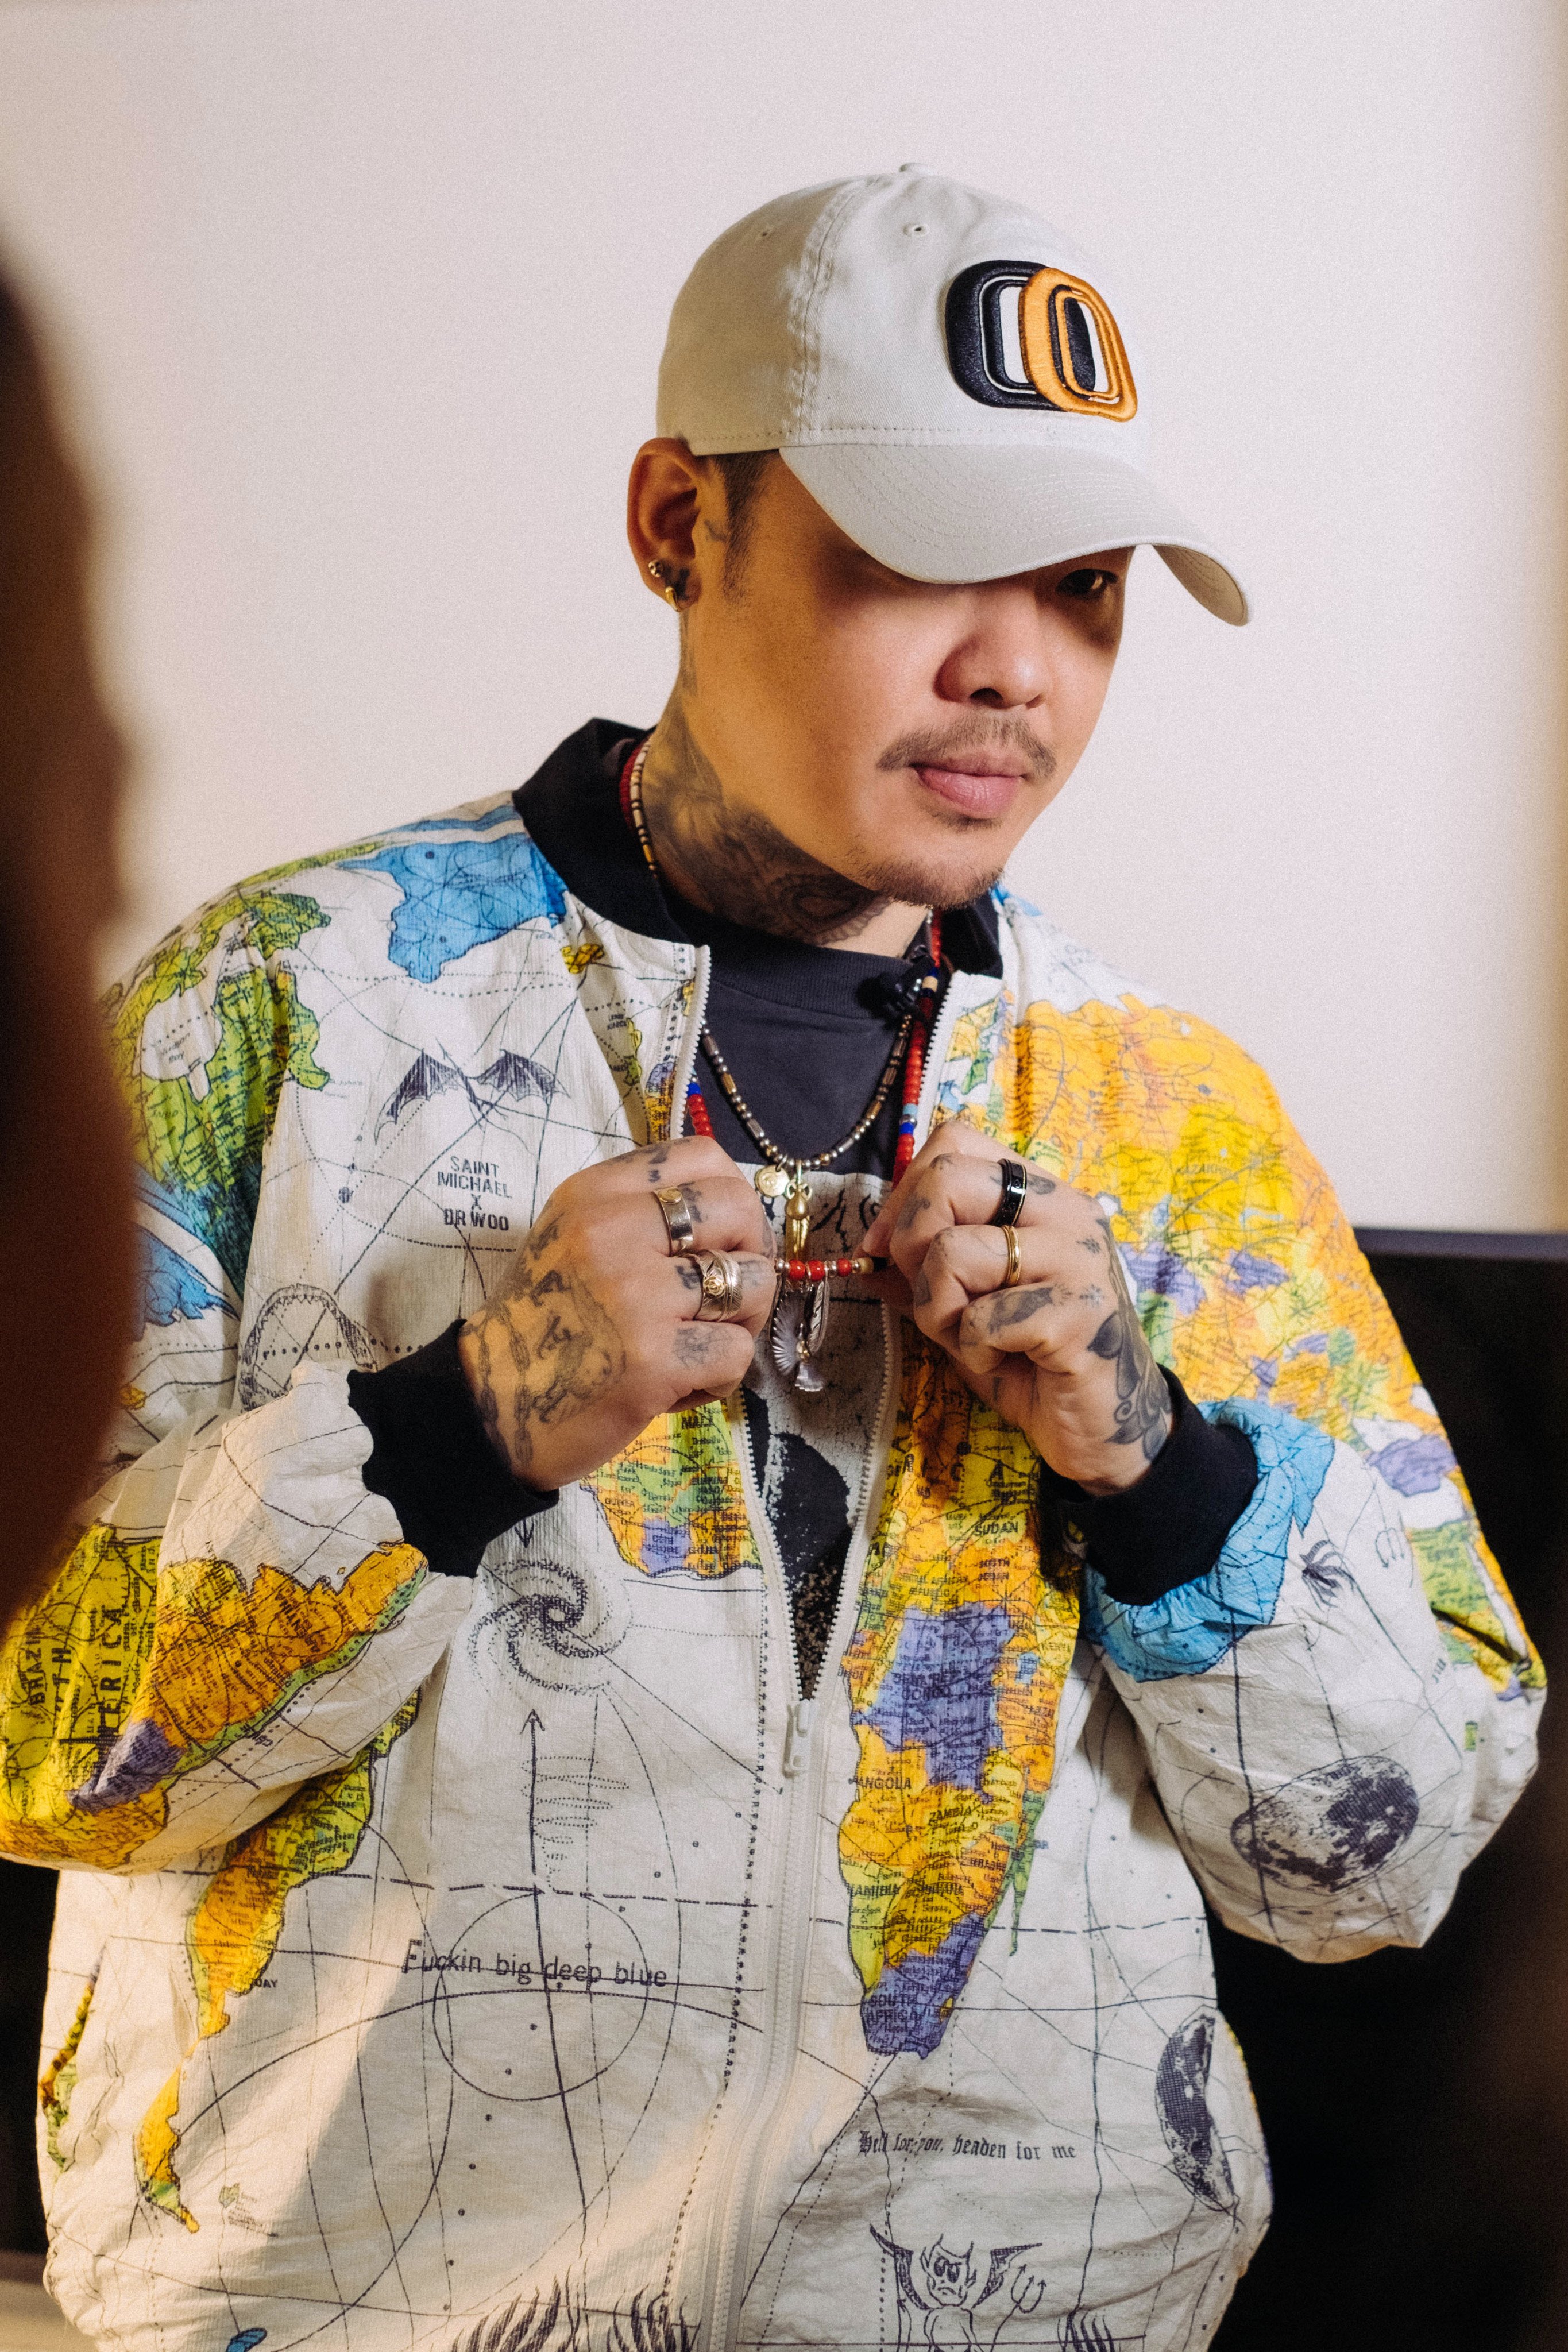 Brian Woo, a tattoo artist who goes by Dr Woo, during a recent visit to Hong Kong. Woo is the go-to tattooist for major celebrities like Justin Bieber and his wife Hailey, Adele, Miley Cyrus, and David Beckham. Photo: courtesy of Dr Woo